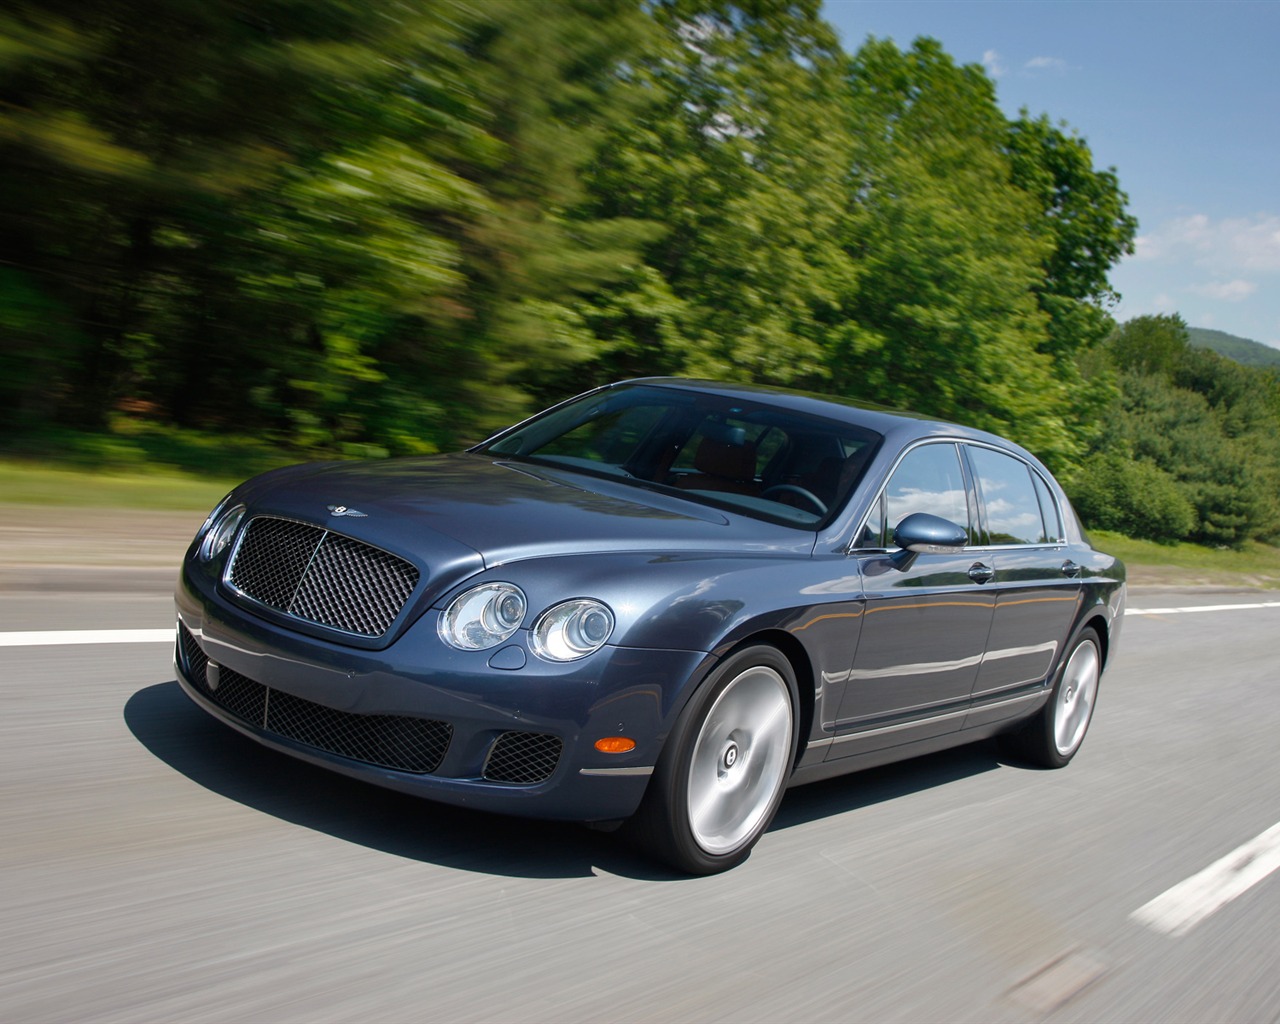 Bentley Continental Flying Spur Speed - 2008 宾利10 - 1280x1024